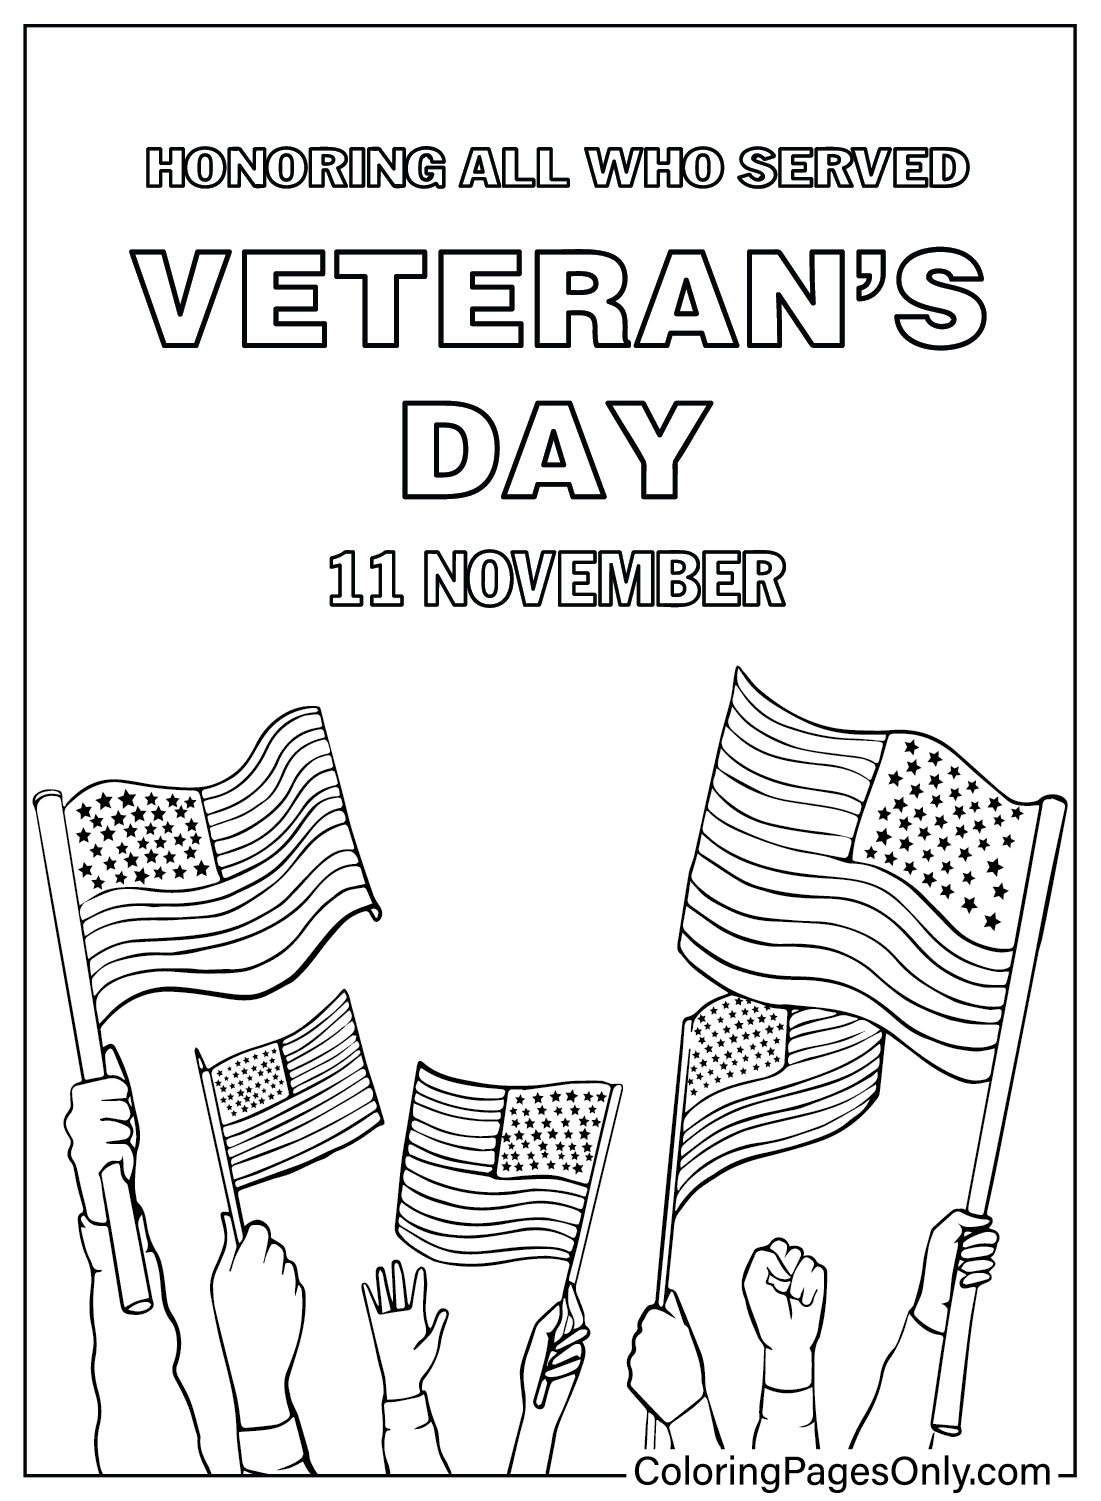 Veterans Day Coloring Page PDF